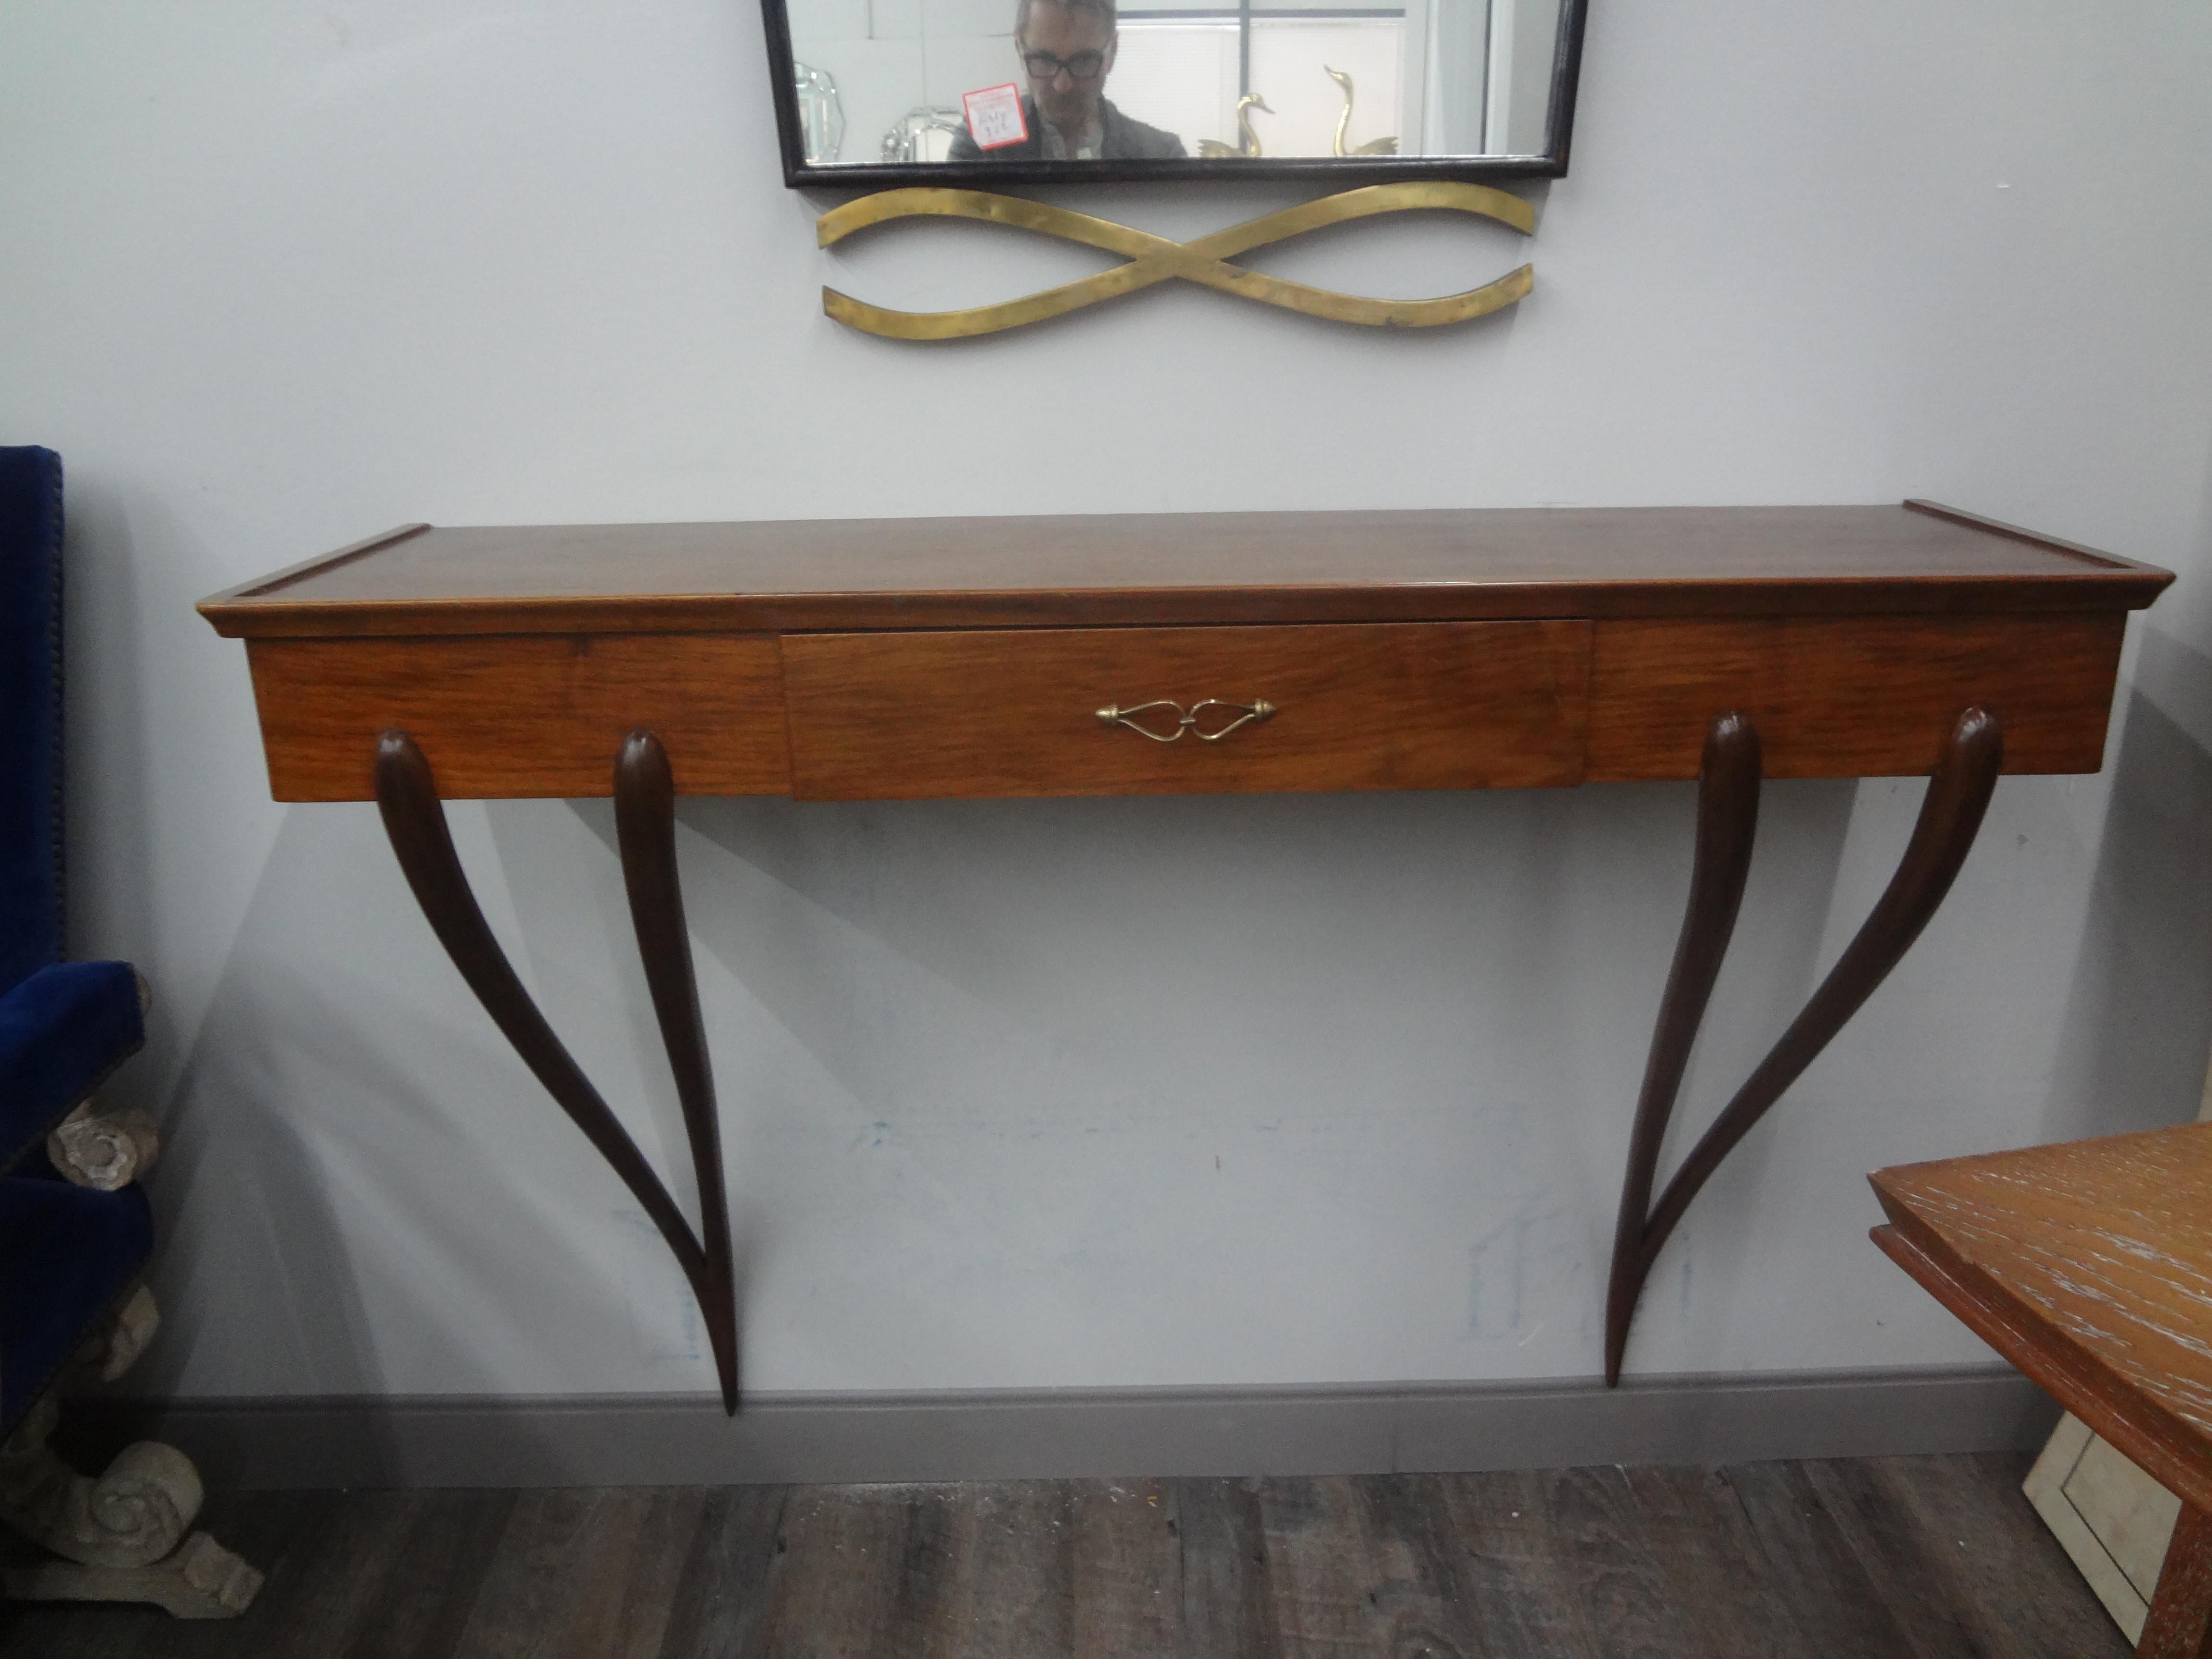 Italian modern console table attributed to Paolo Buffa.
This unusual Italian Mid-Century Modern wall mount console made of Italian walnut has ebonized tapered legs, bronze hardware and a single drawer.
Our console has the original clear glass top